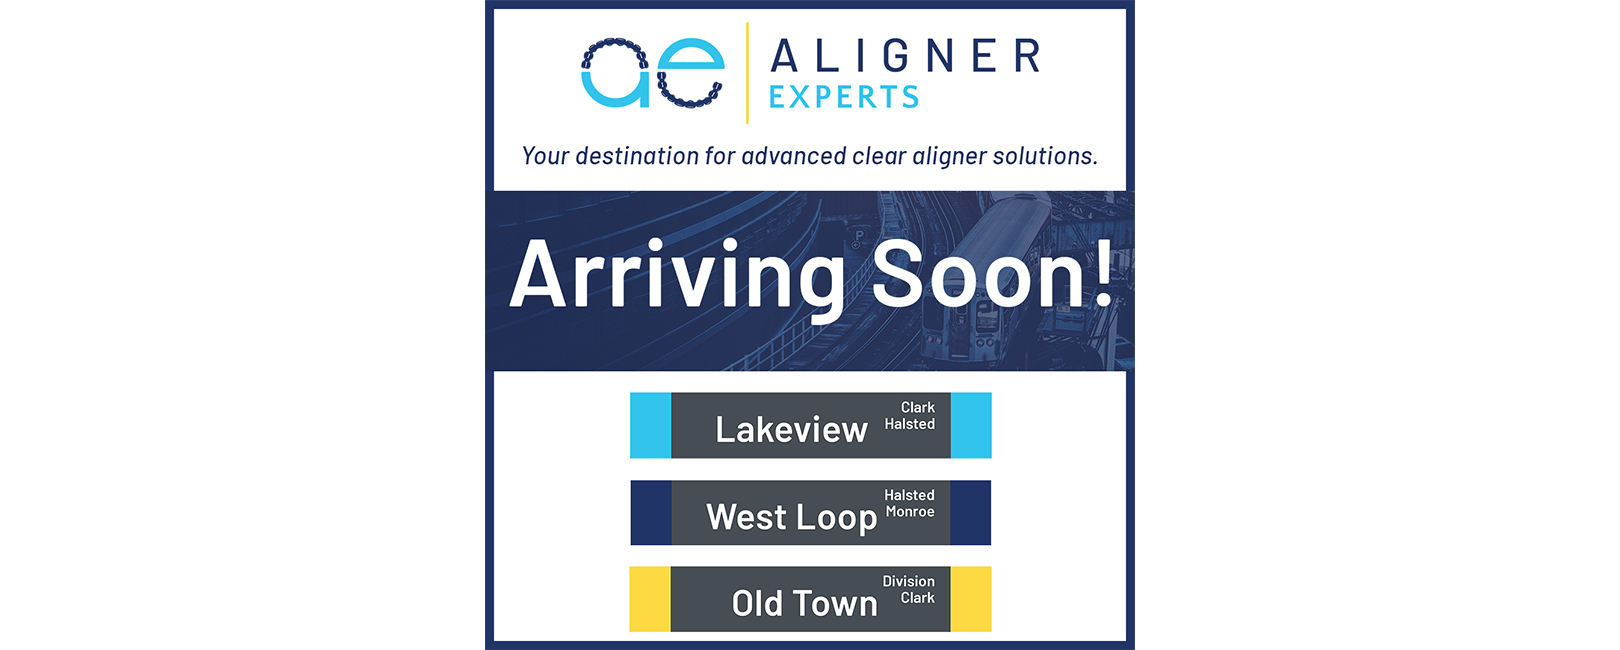 A promotional banner for Clear Aligners Experts Chicago, advertising clear aligner solutions with location signs for Lakeview, West Loop, and Old Town.